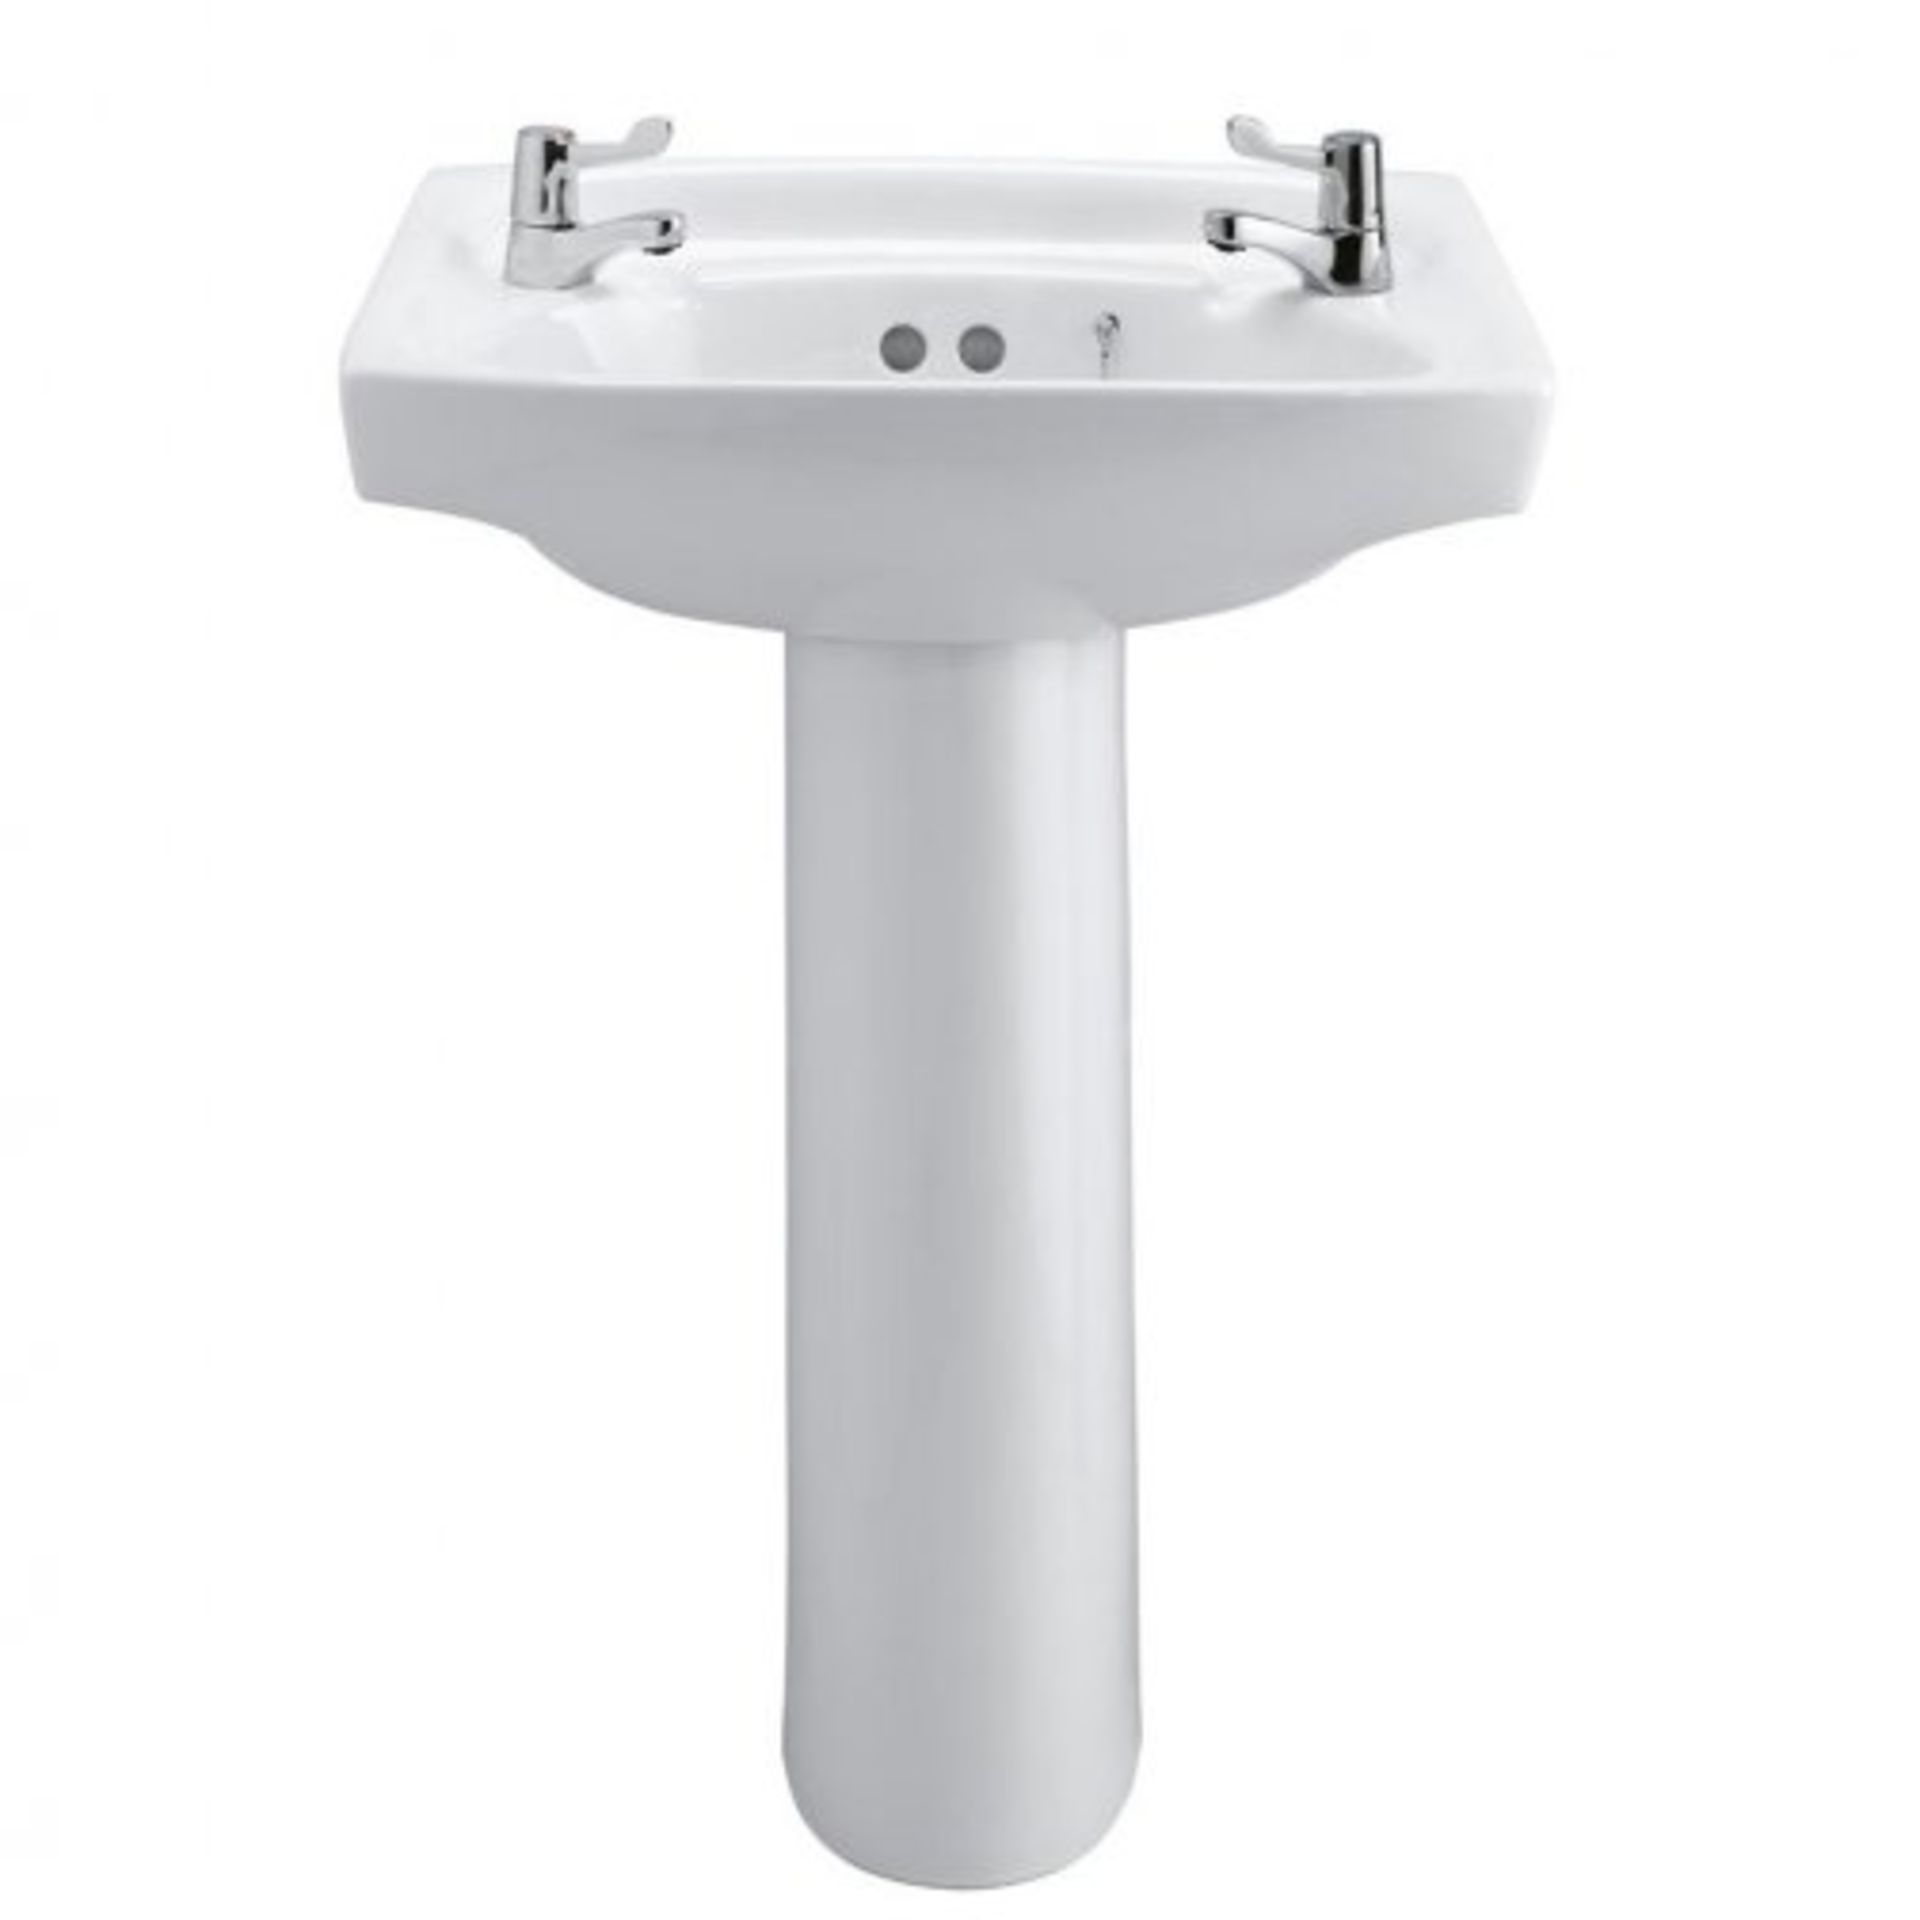 Ideal Standard Ideal Standard Royalex Wall Hung Basin - 510mm Wide - 2 Tap Hole - White